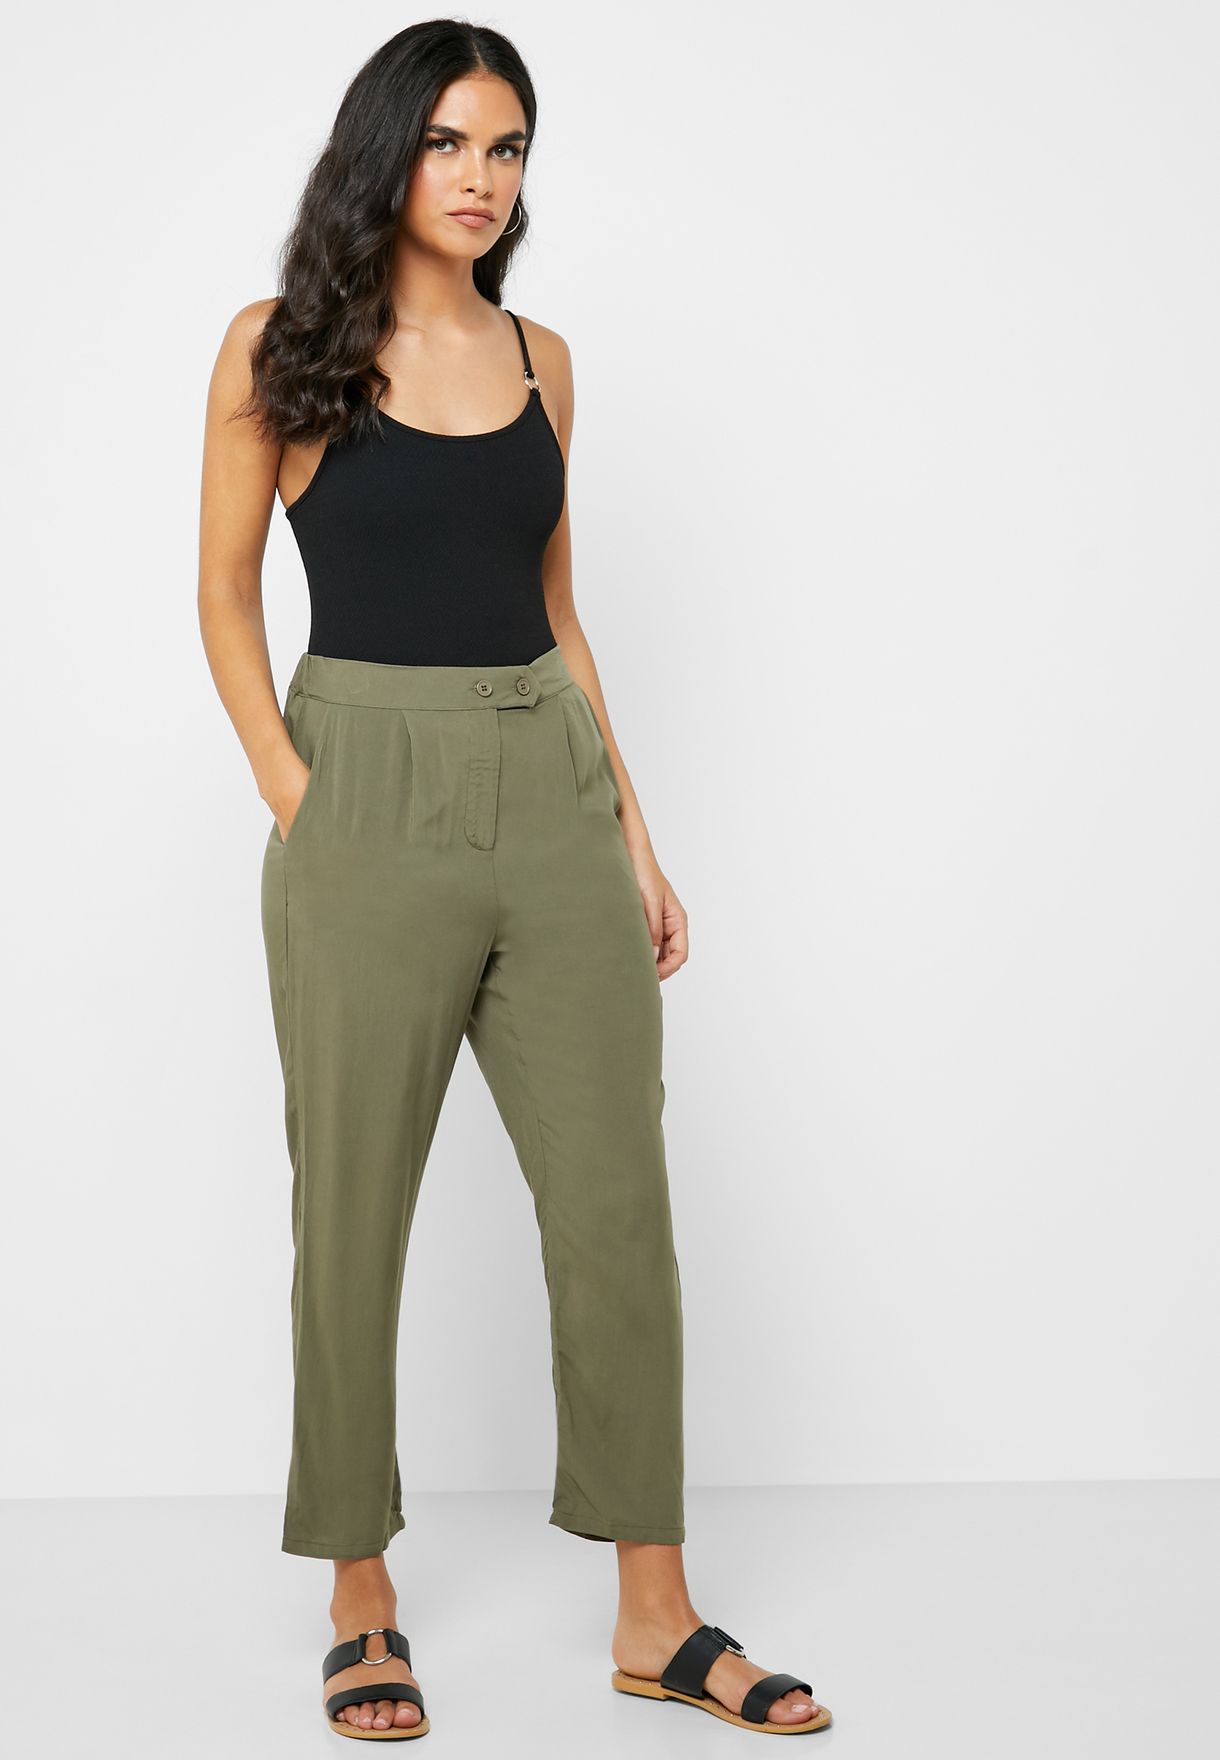 tapered pants for ladies